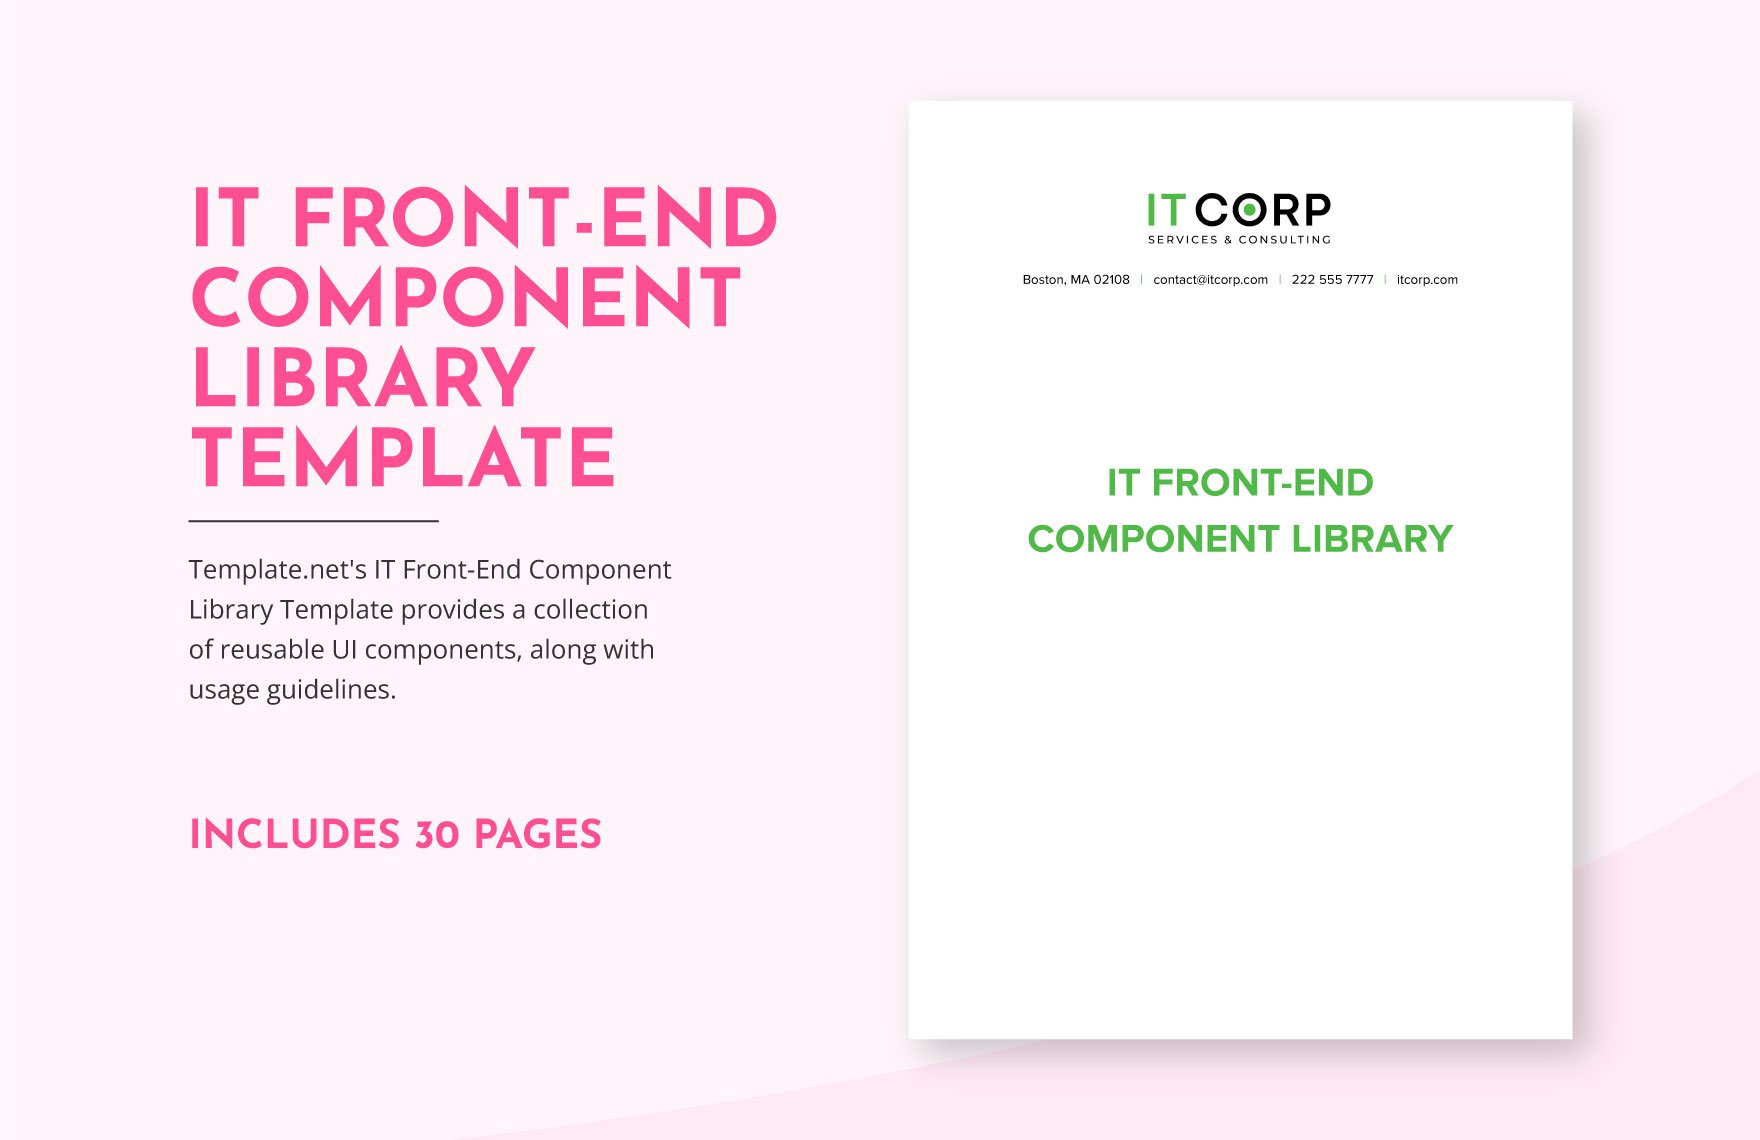 IT Front-End Component Library Template in Word, Google Docs, PDF